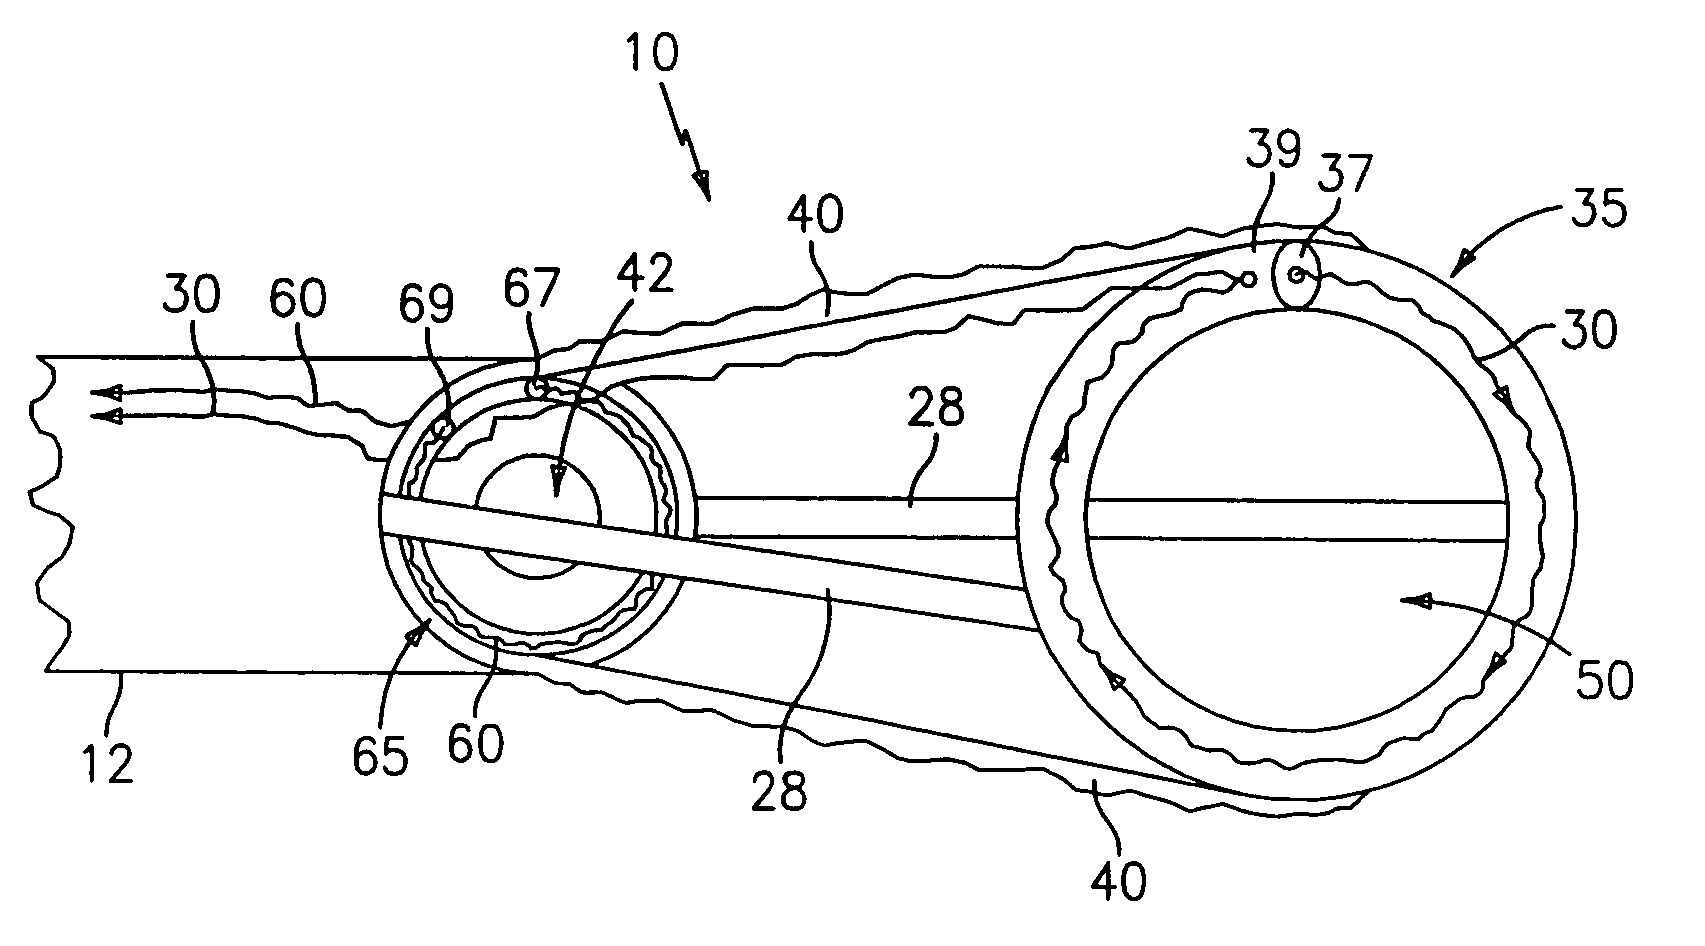 Endoscopic tissue removal apparatus and method